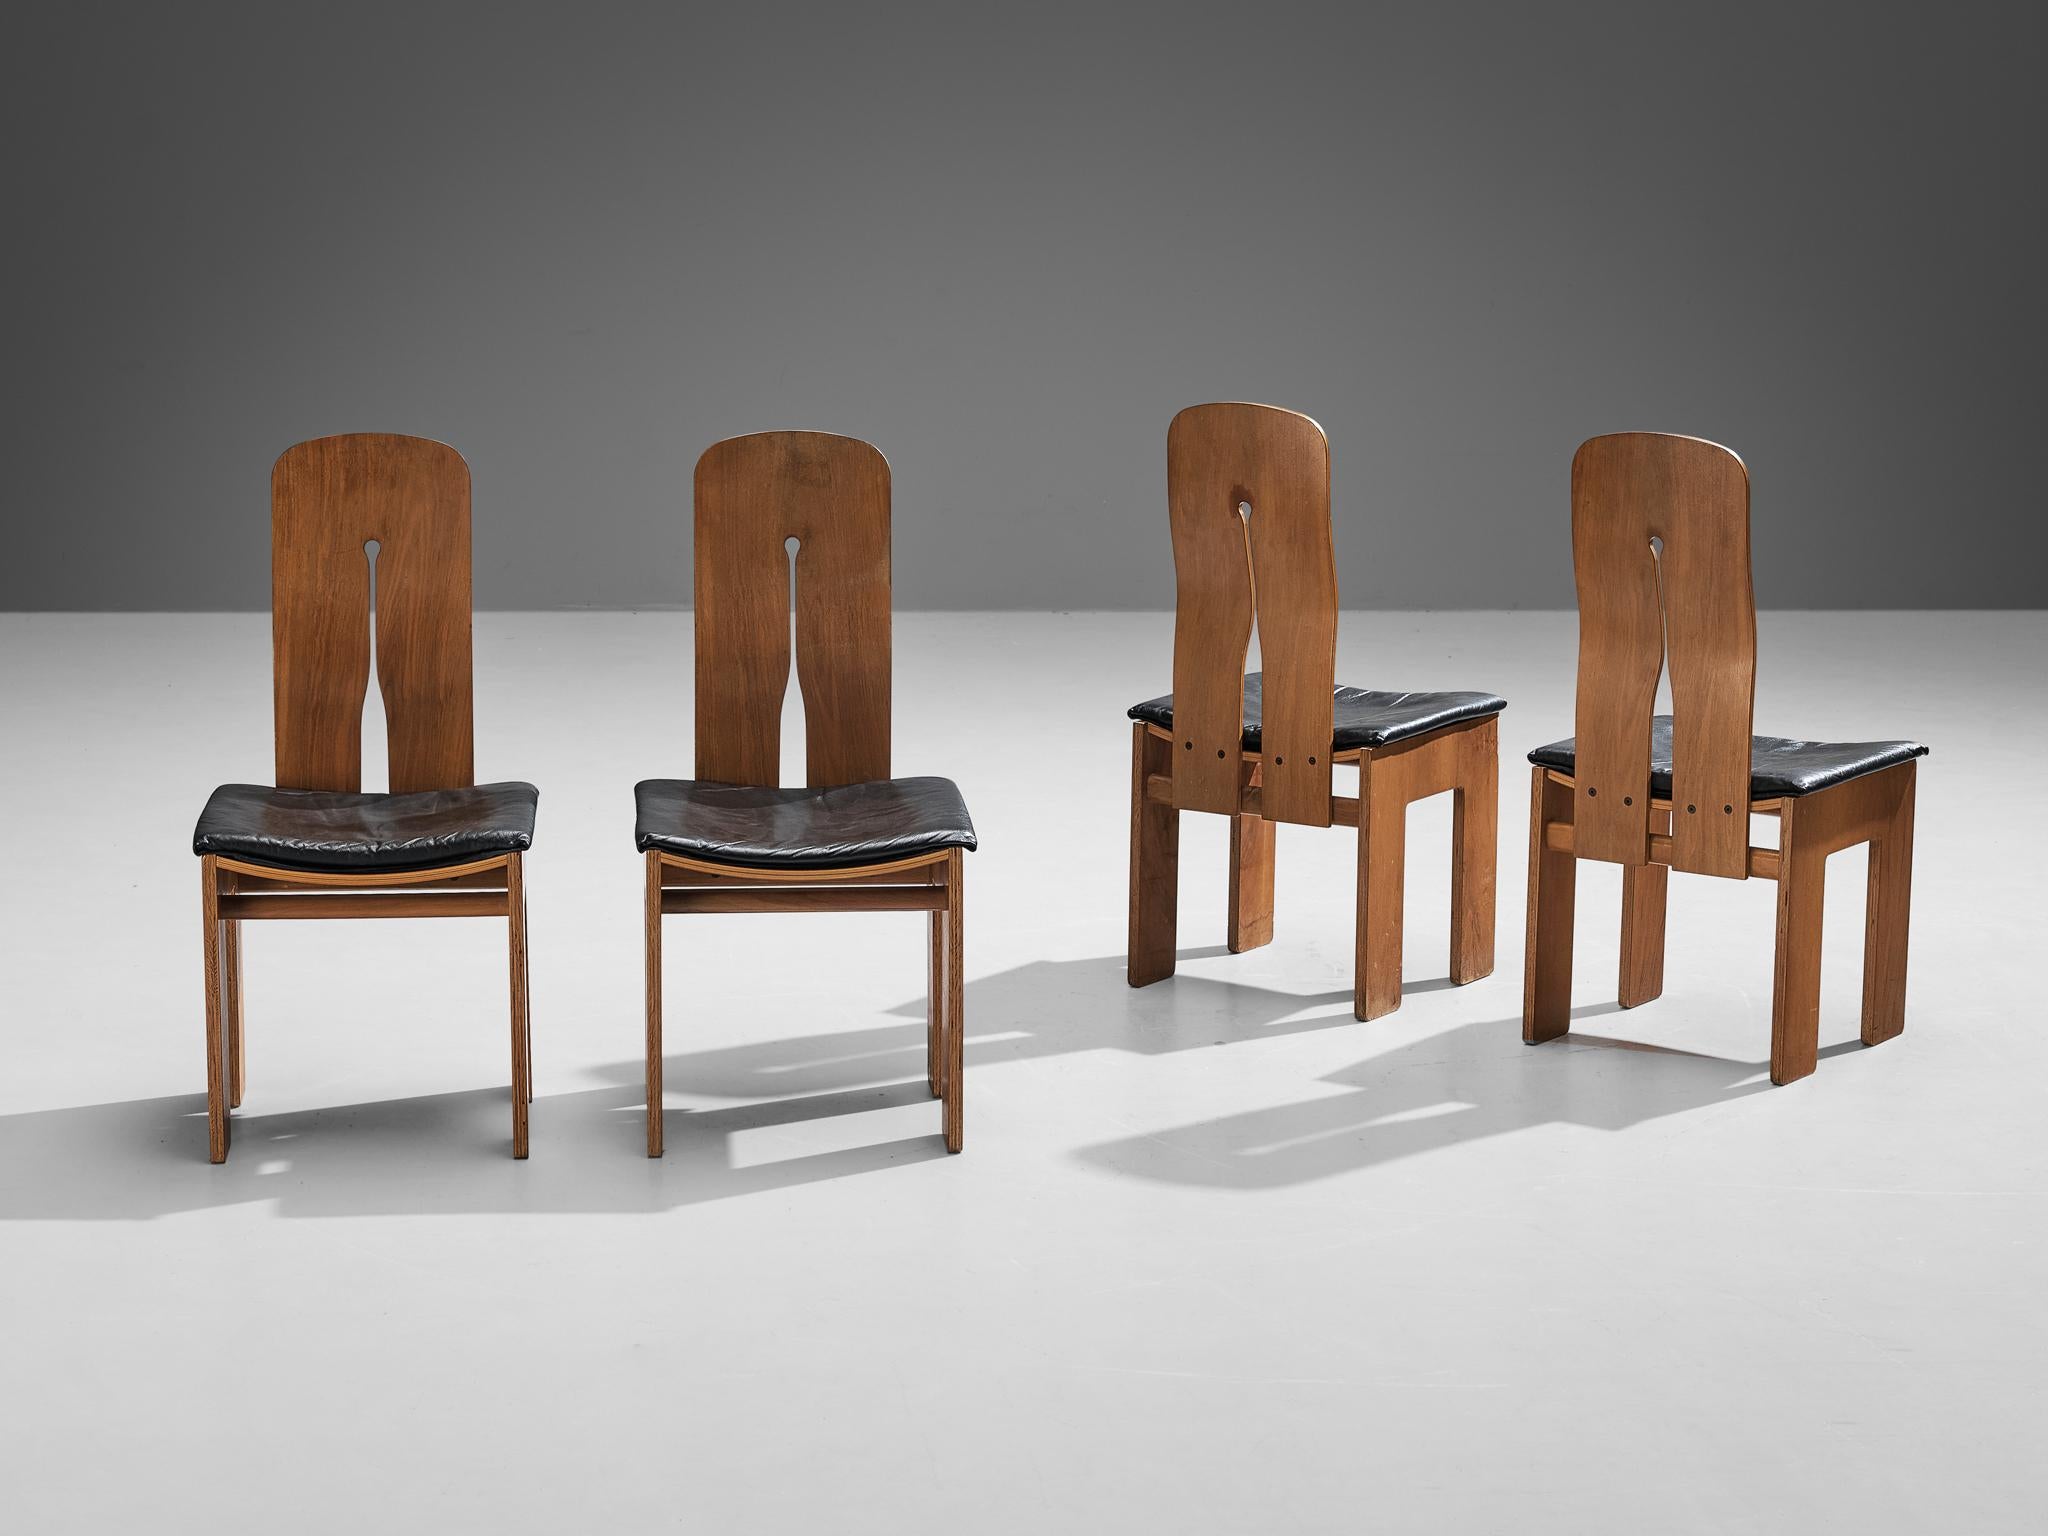 Carlo Scarpa for Bernini, set of four dining chairs, model '765', walnut veneer, leather, designed in 1934, produced in 1977. 

These well-proportioned chairs are designed by Carlo Scarpa in 1934, a design that was not produced until 1977. He